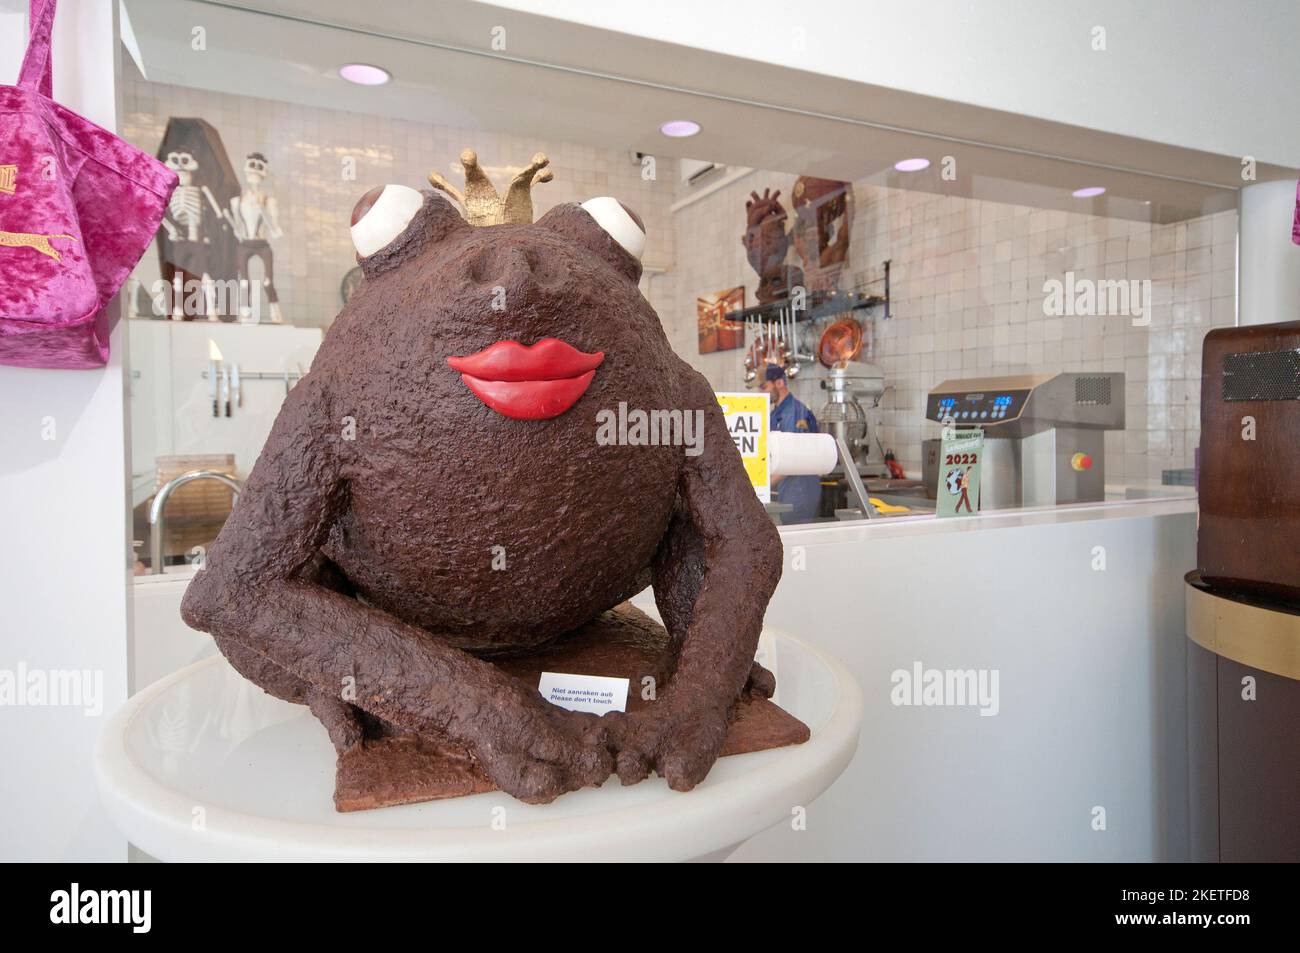 Chocolate frog sculpture on display in the famous 'The Chocolate Line' store, Antwerp (Flanders), Belgium Stock Photo